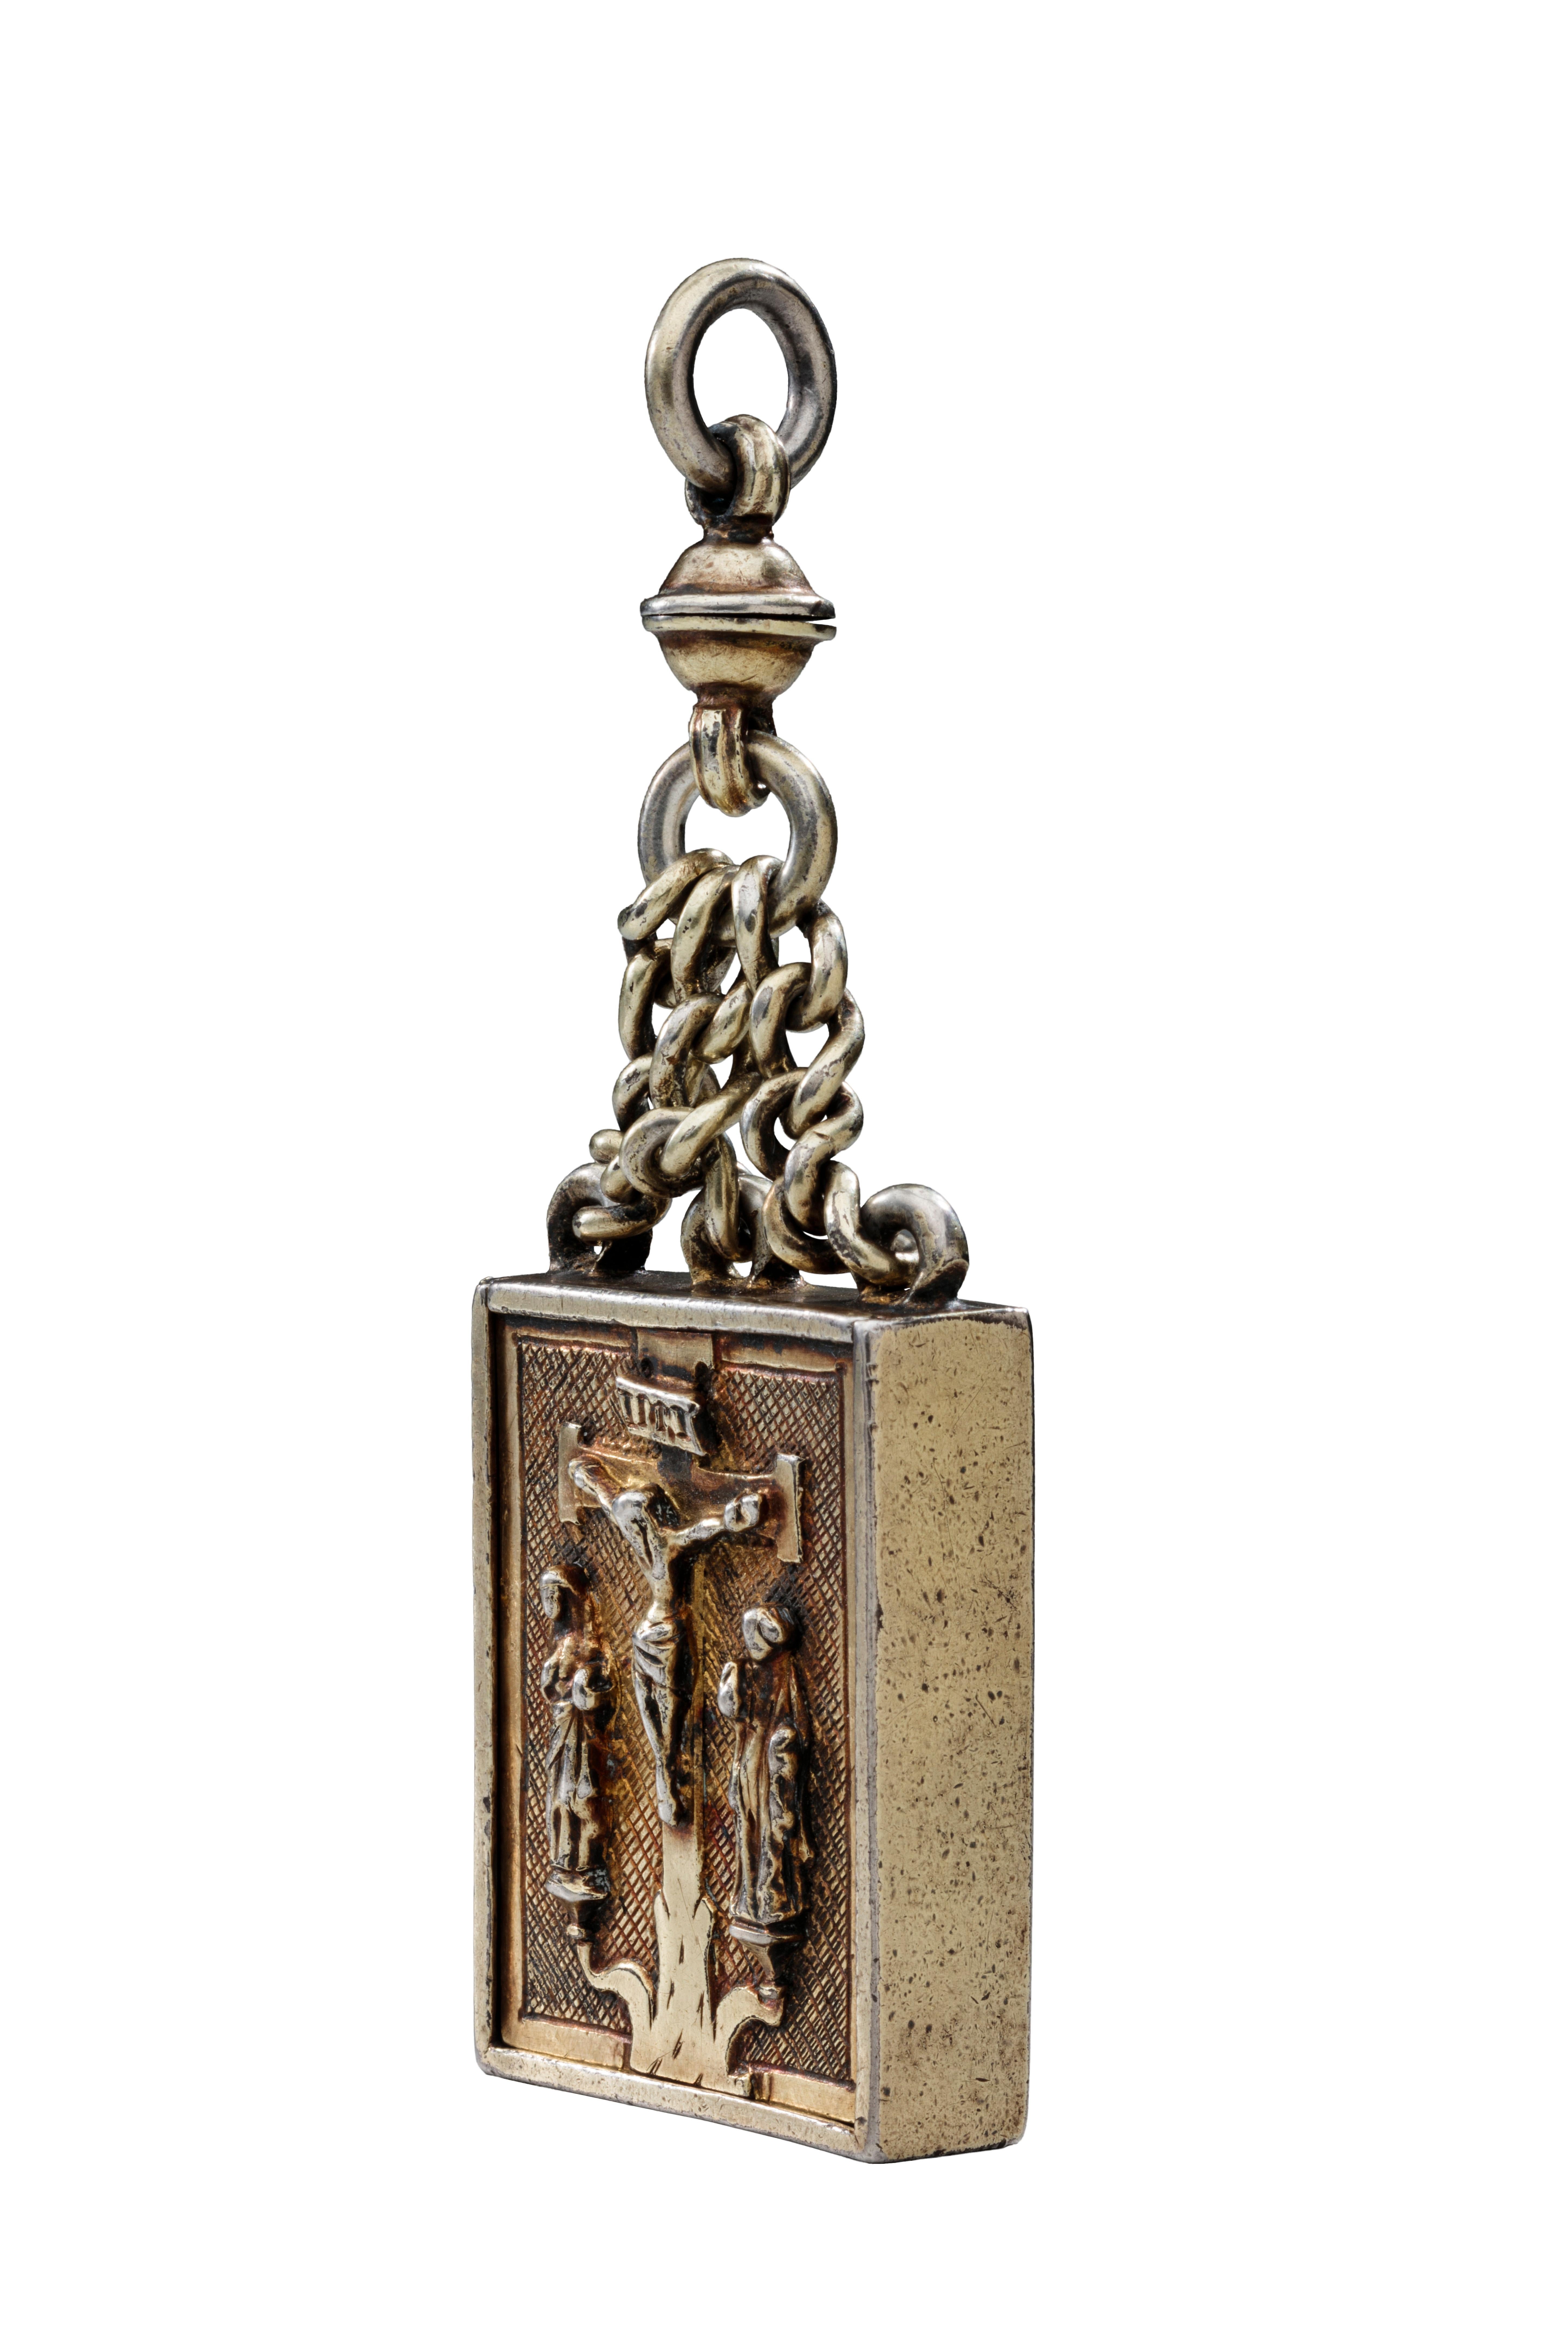 Reliquary Pendant with Crucifixion
Germany, 1450–1500 
Gilded silver 
Weight 88.3 grams; dimensions 102 × 39 × 11 mm (with chain), 46 × 39 × 11 mm (without chain) 

Gilded silver reliquary pendant comprising a flat rectangular box with plain sides